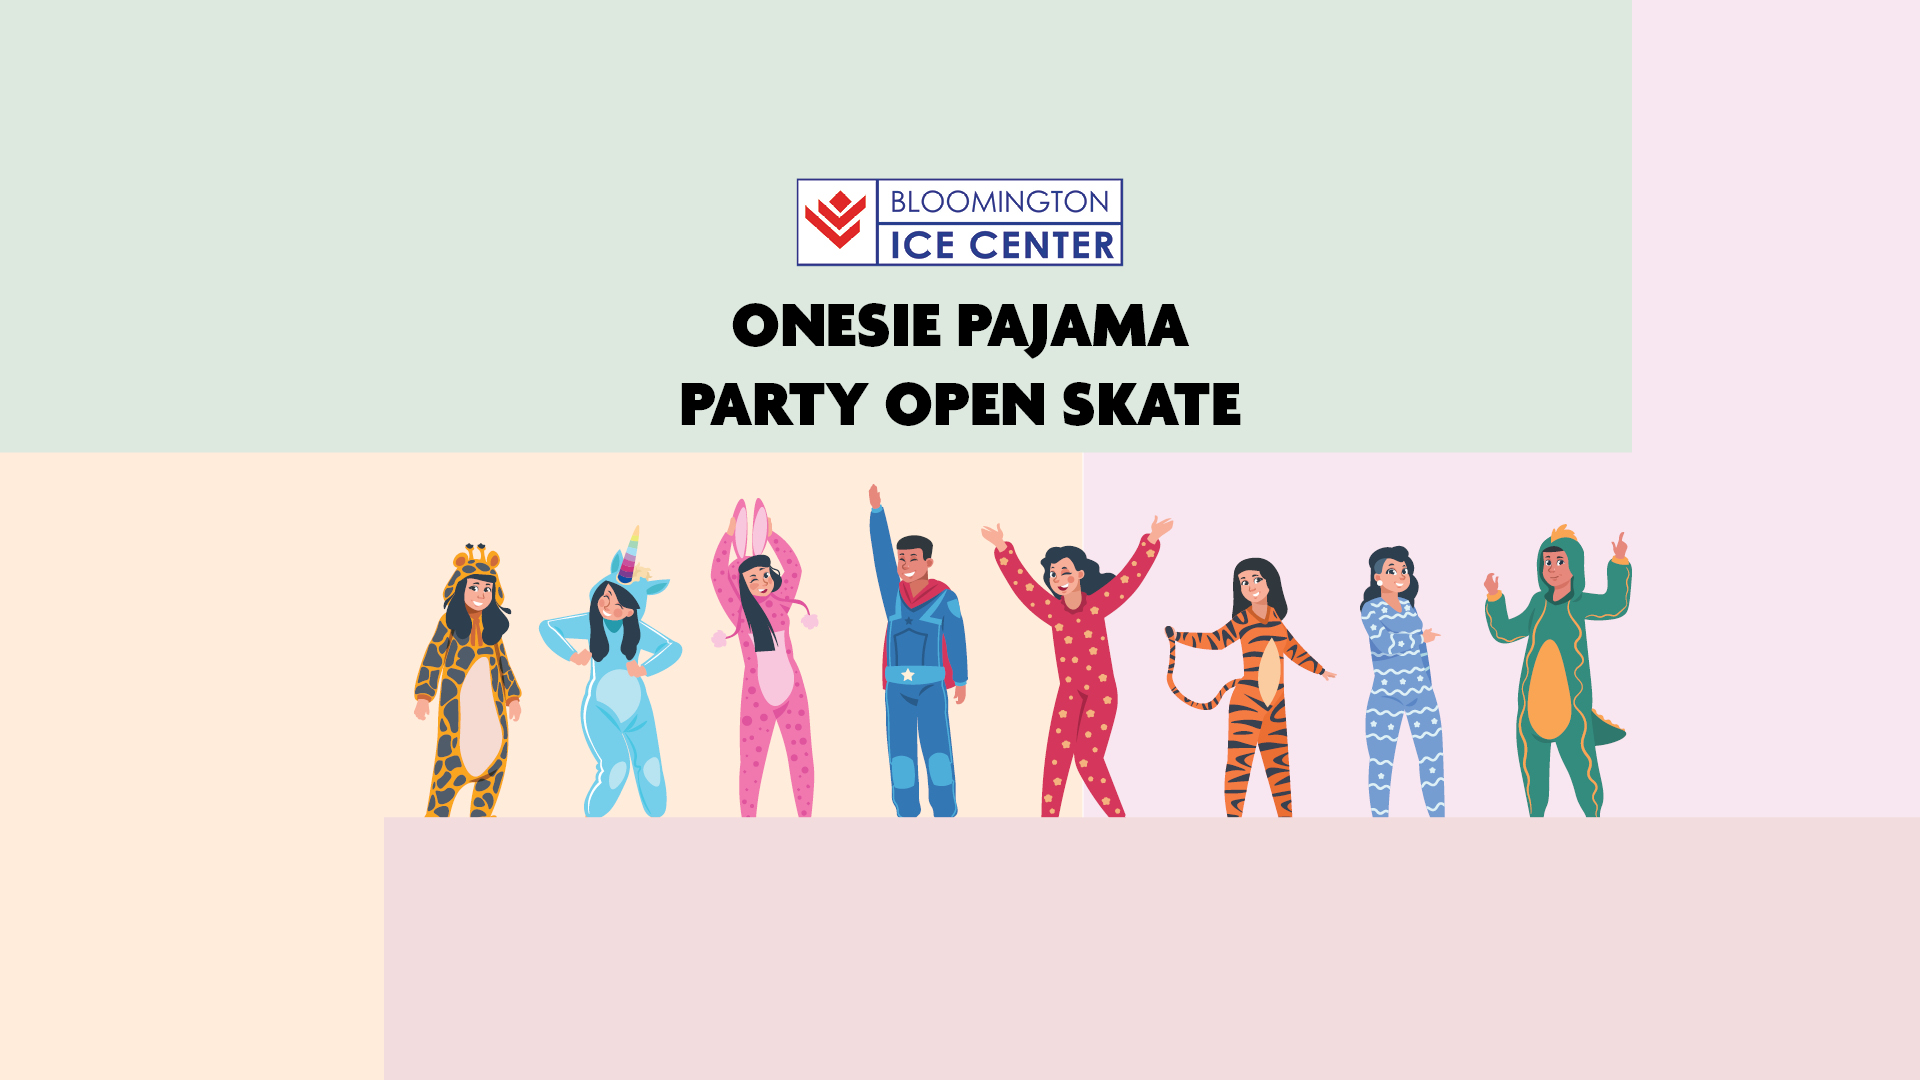 Onesie Pajama Party Open Skate at Bloomington Ice Center